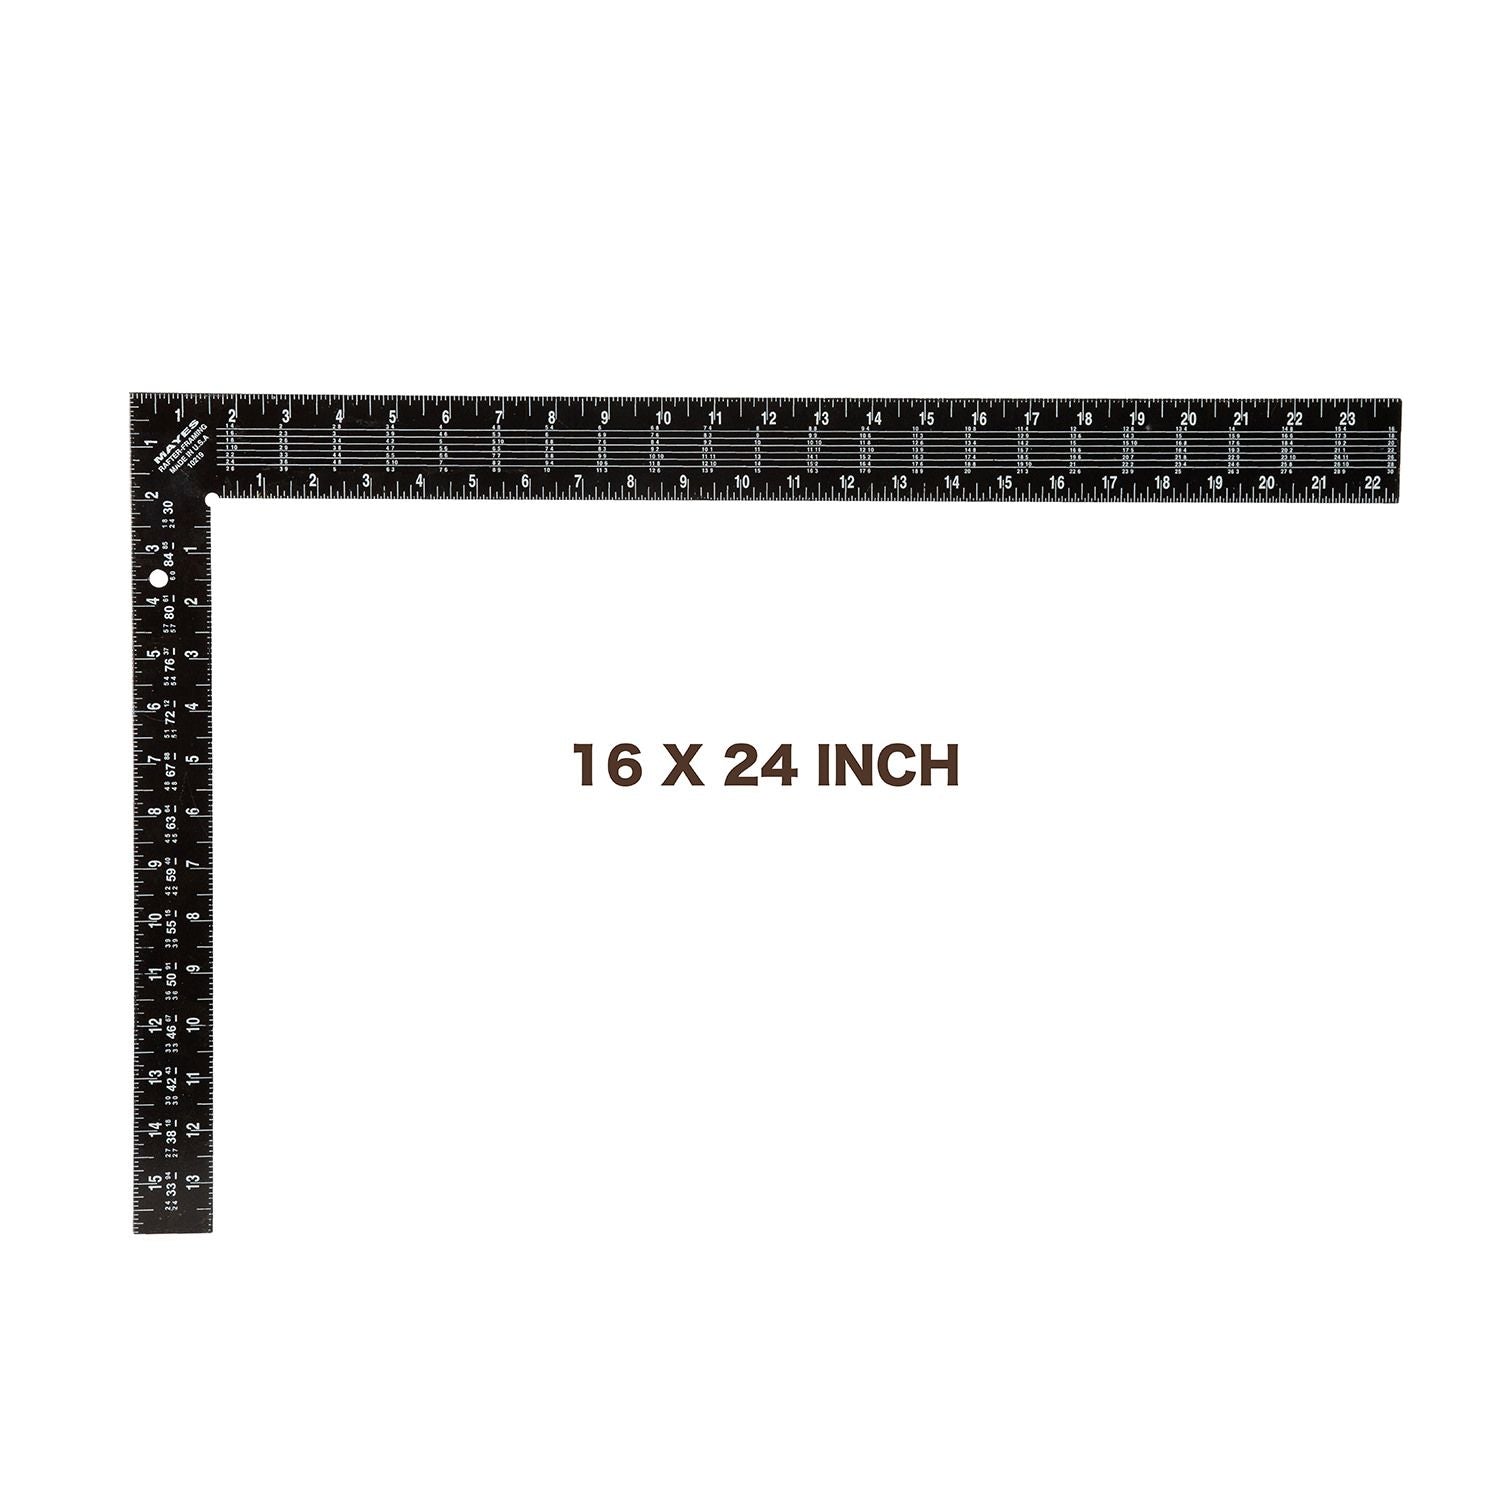 Mayes 16" X 24" Black Steel Rafter Square 10219-1